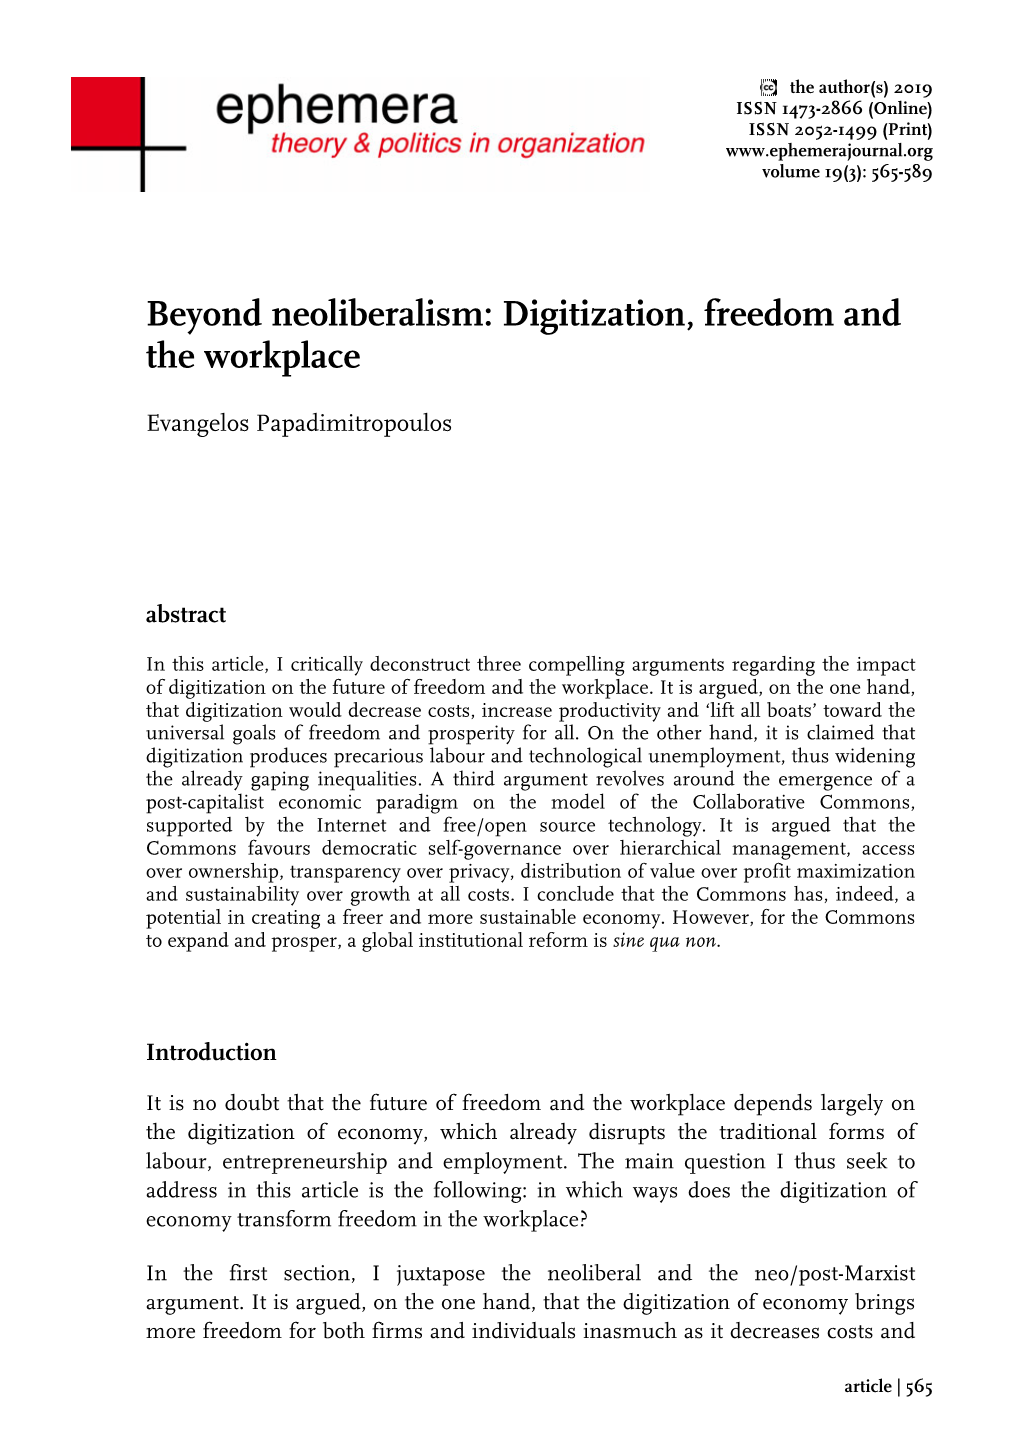 Beyond Neoliberalism: Digitization, Freedom and the Workplace